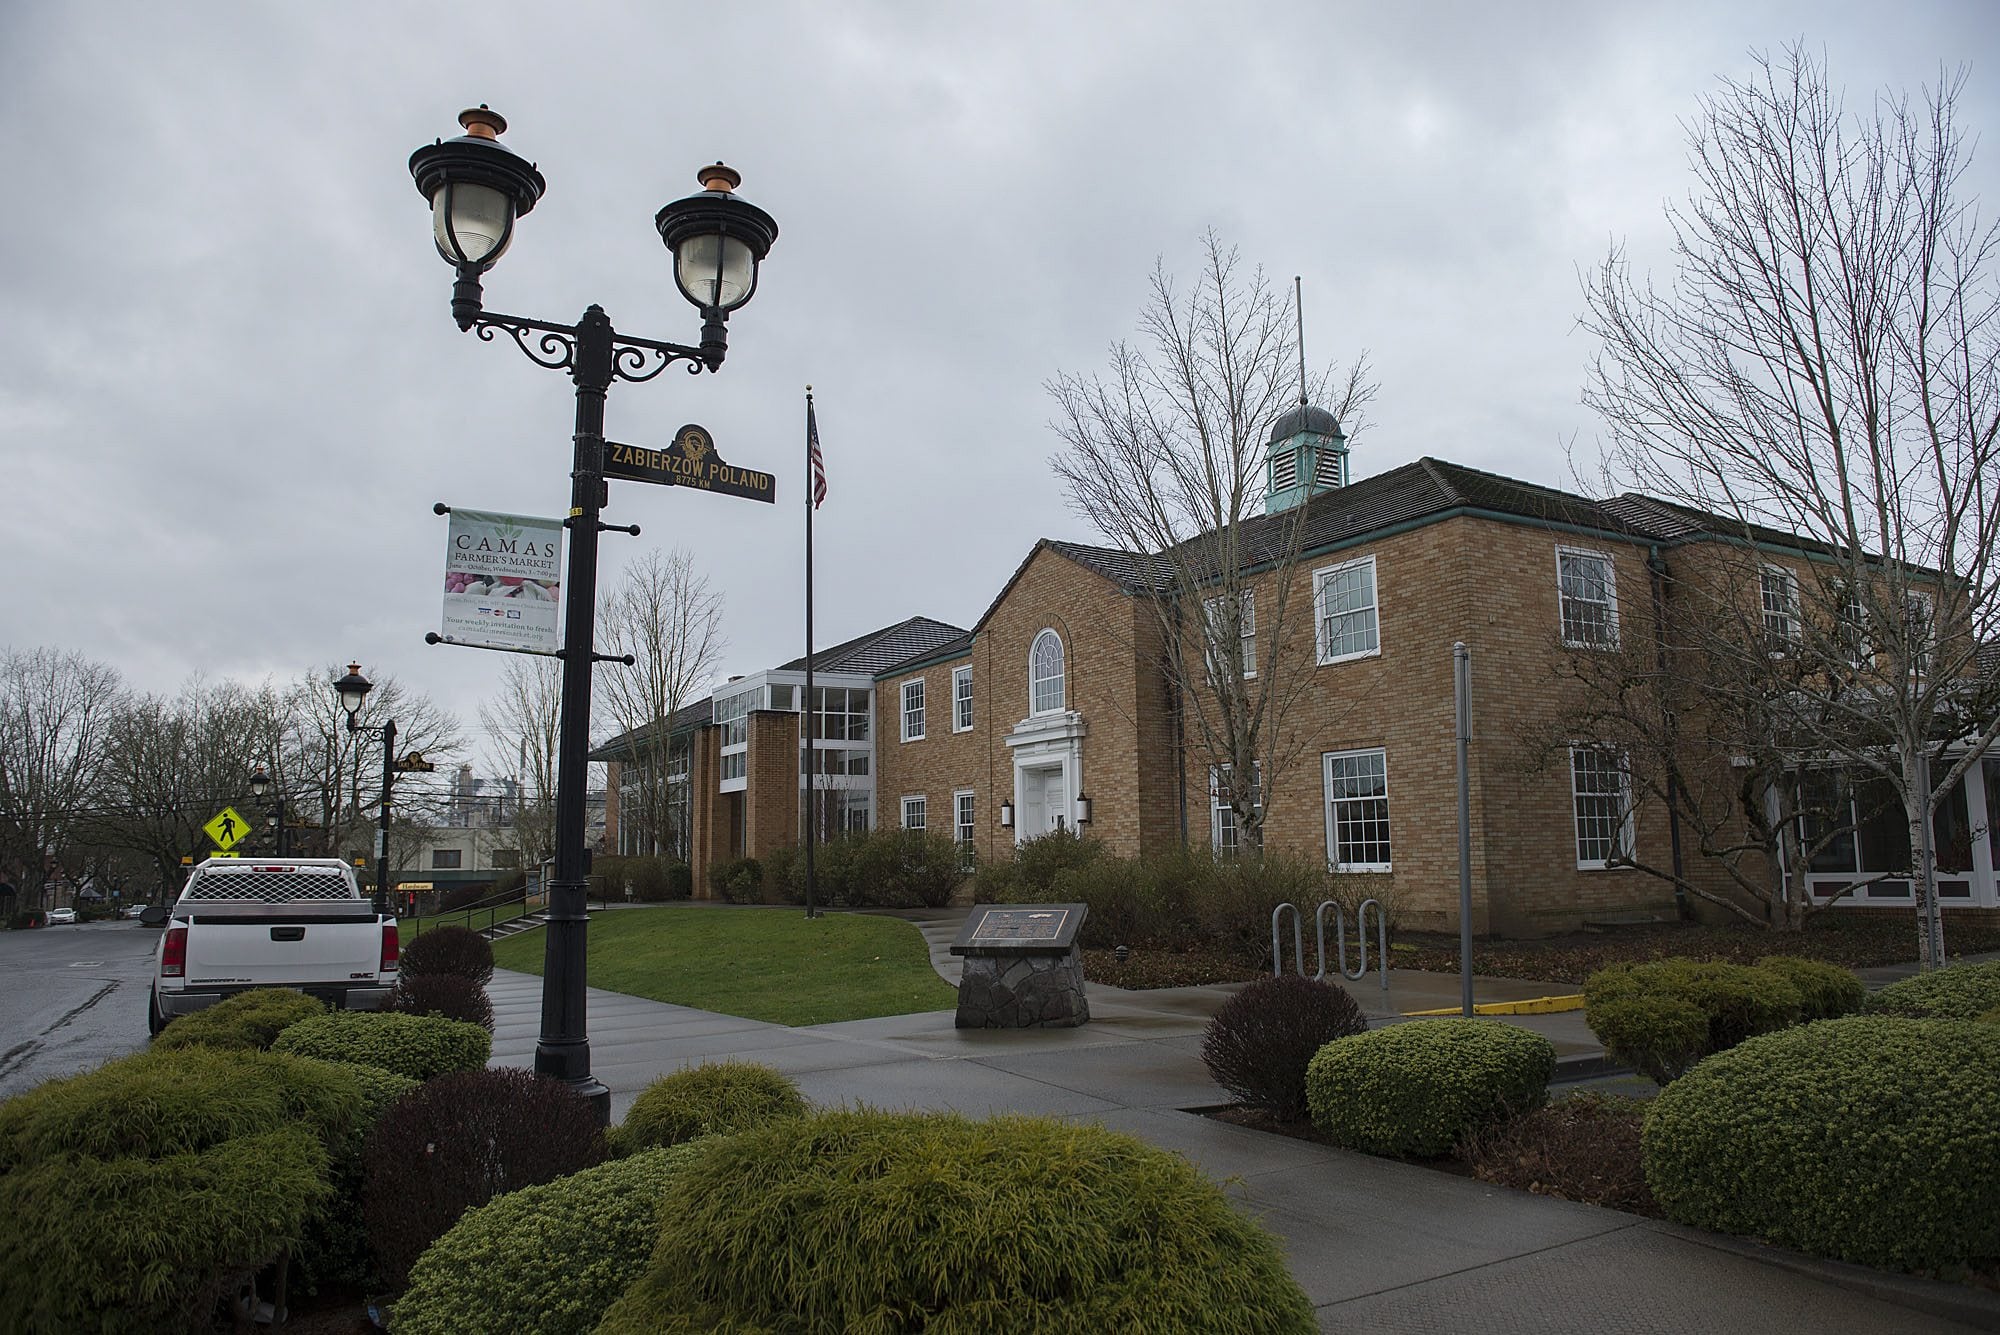 The Camas Public Library will remain independent, the Camas City Council has decided.